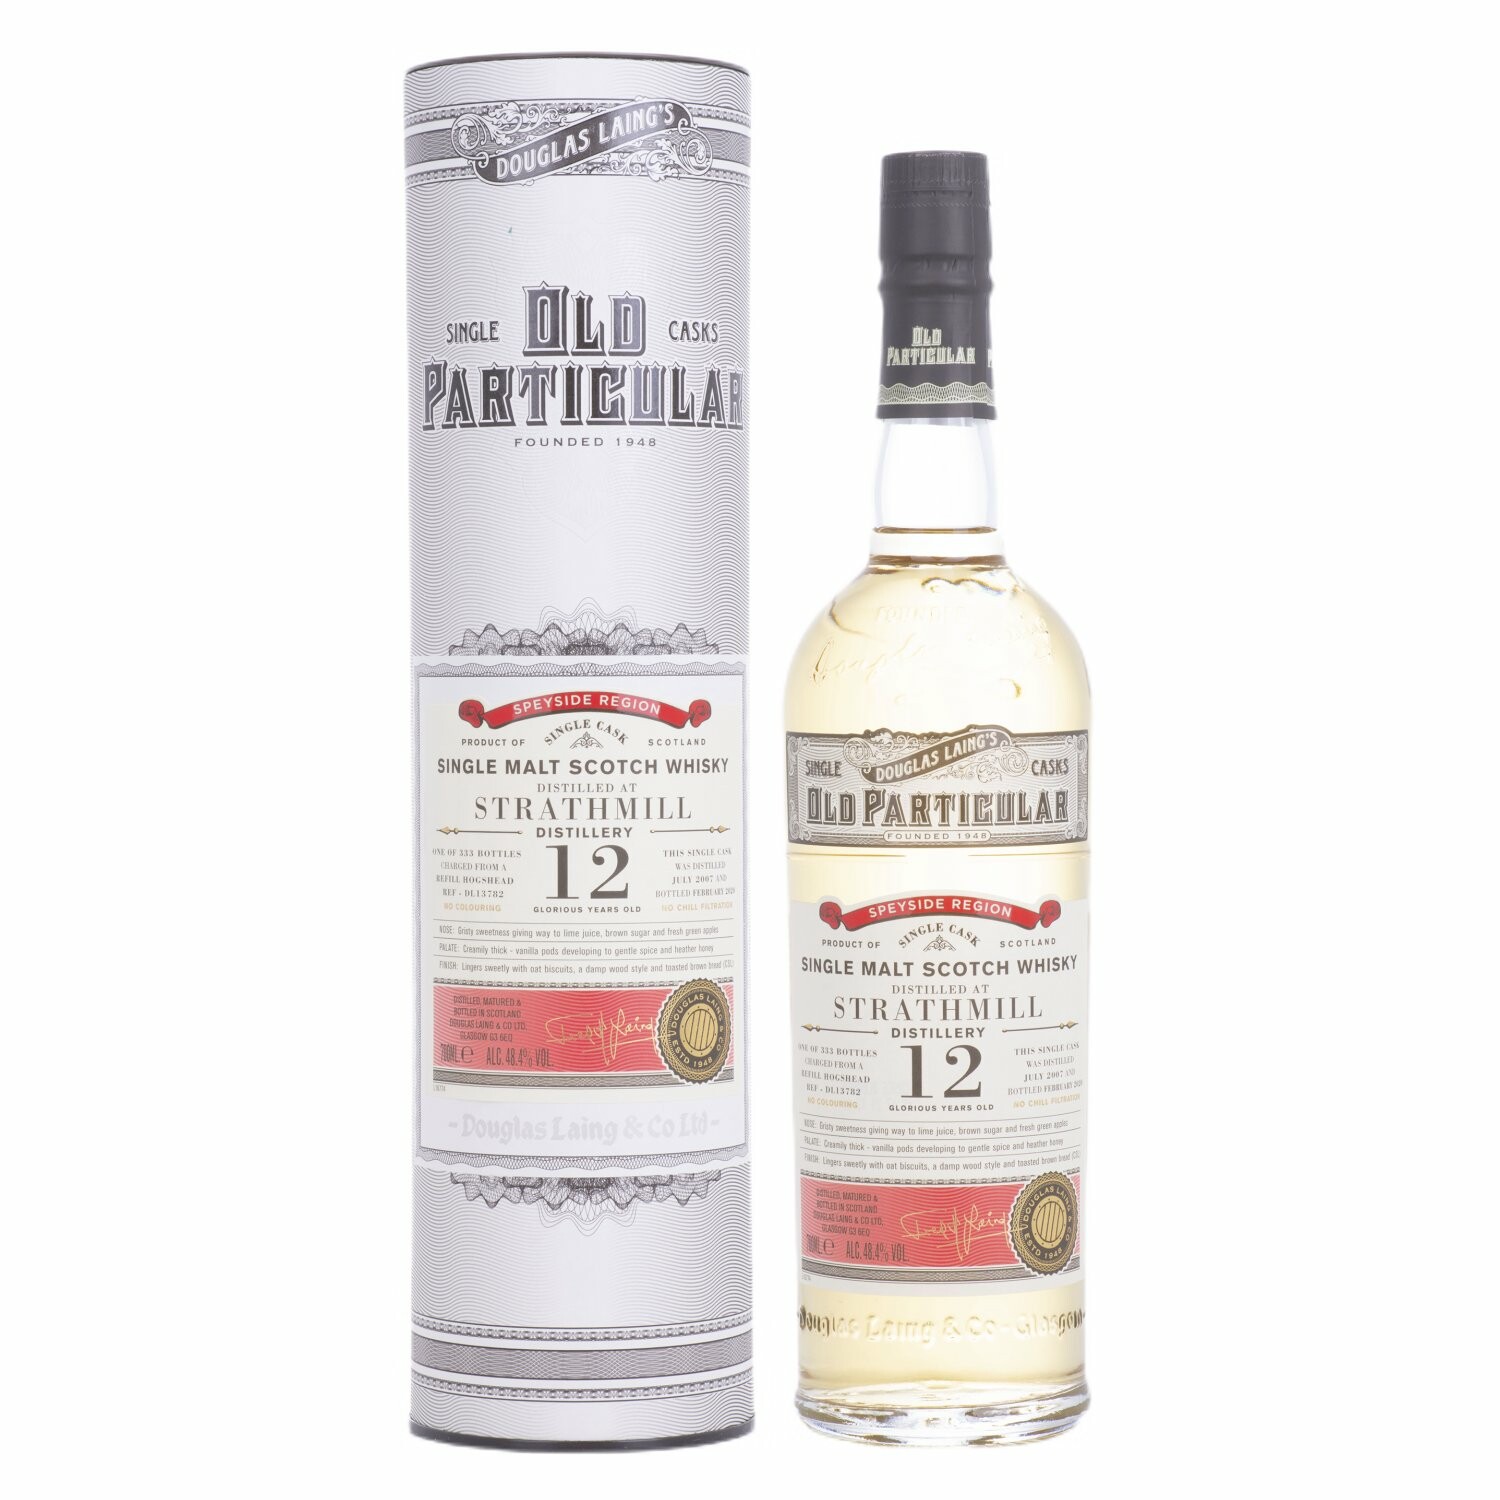 Douglas Laing OLD PARTICULAR Strathmill 12 Years Old Single Cask Malt 2007 48,4% Vol. 0,7l in Giftbox